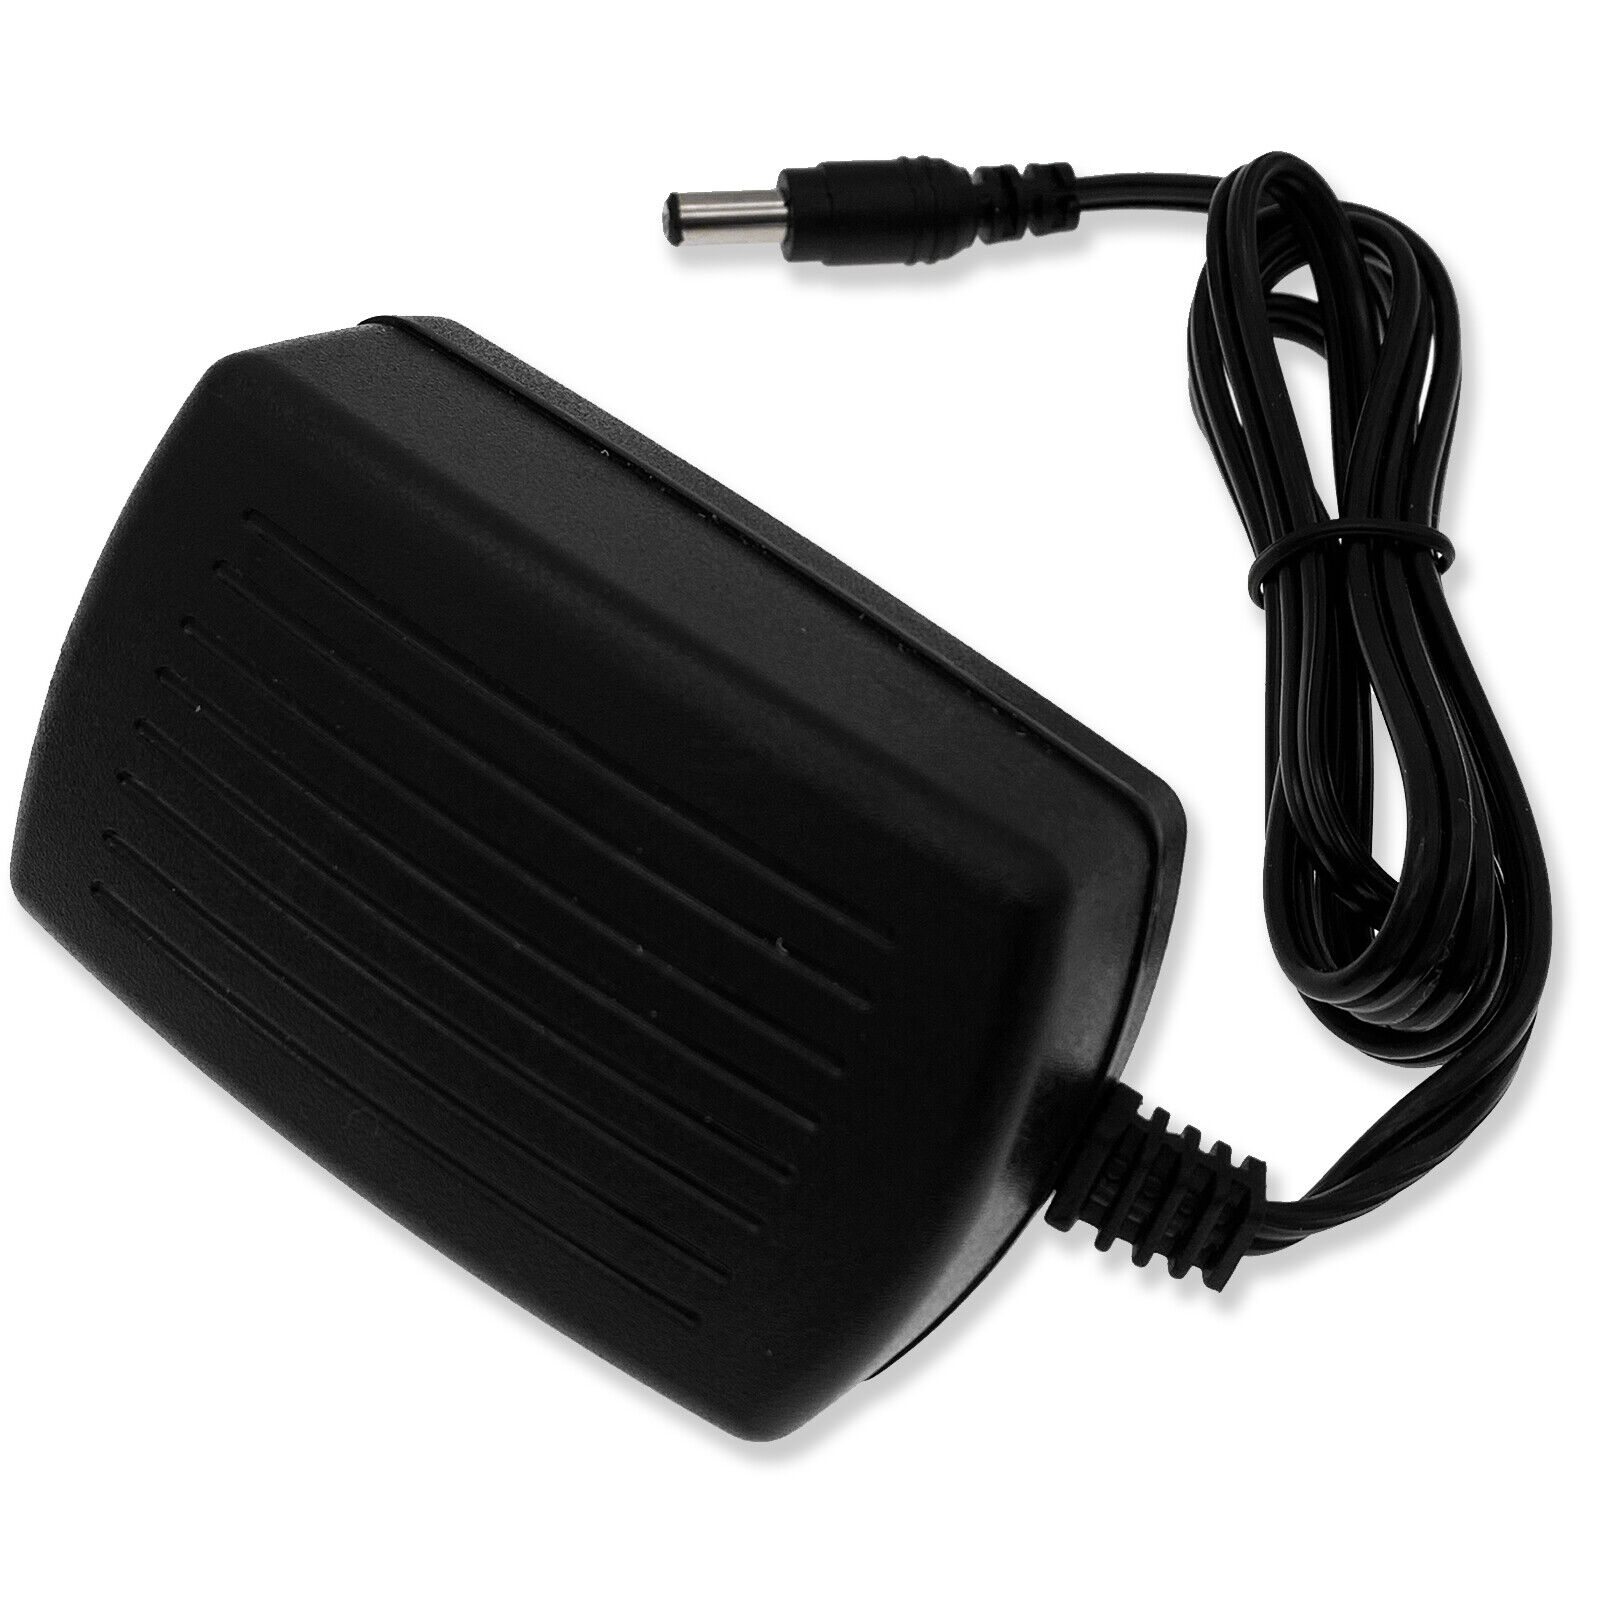 12V 2A AC Adapter For CS Model: CS-1202000 Wall Home Charger Power Supply Cord Brand Unbranded Color Black Compati